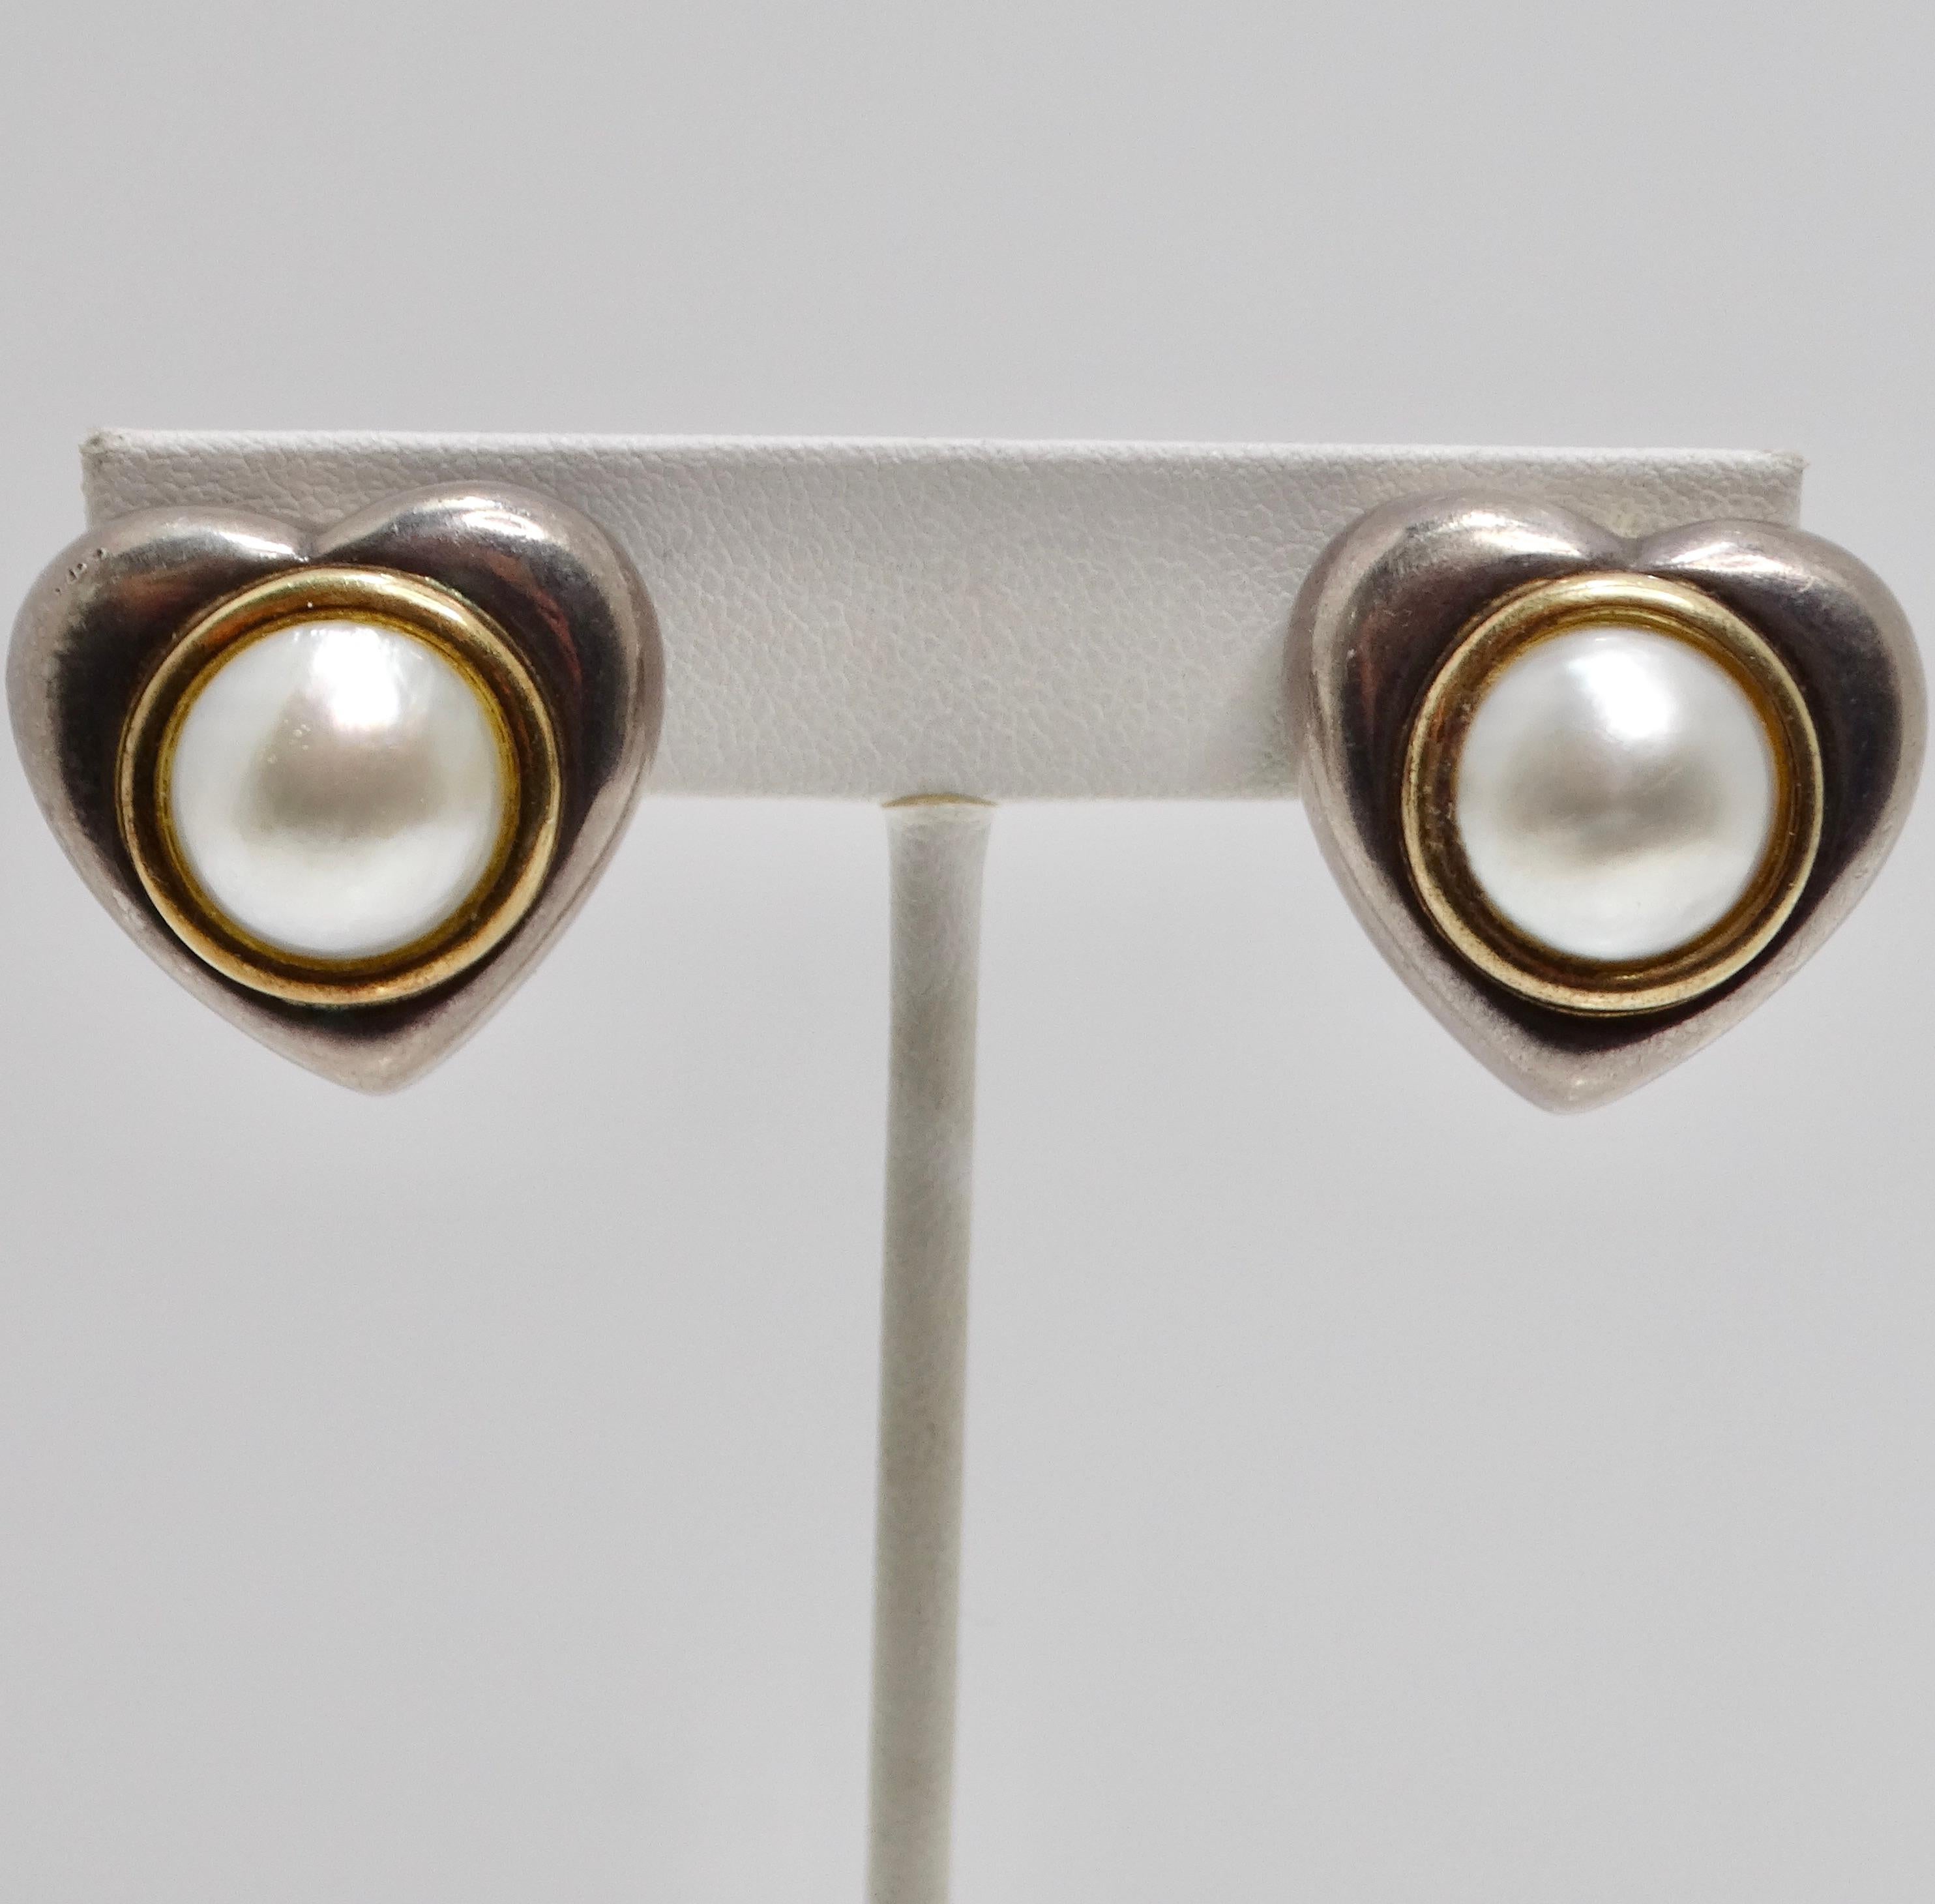 Introducing the exquisite 1960s 18K Gold Silver Pearl Heart Earrings, a beautiful vintage accessory that exudes timeless elegance and romance. Crafted in the 1960s, these heart-shaped earrings feature a luxurious silver base adorned with stunning